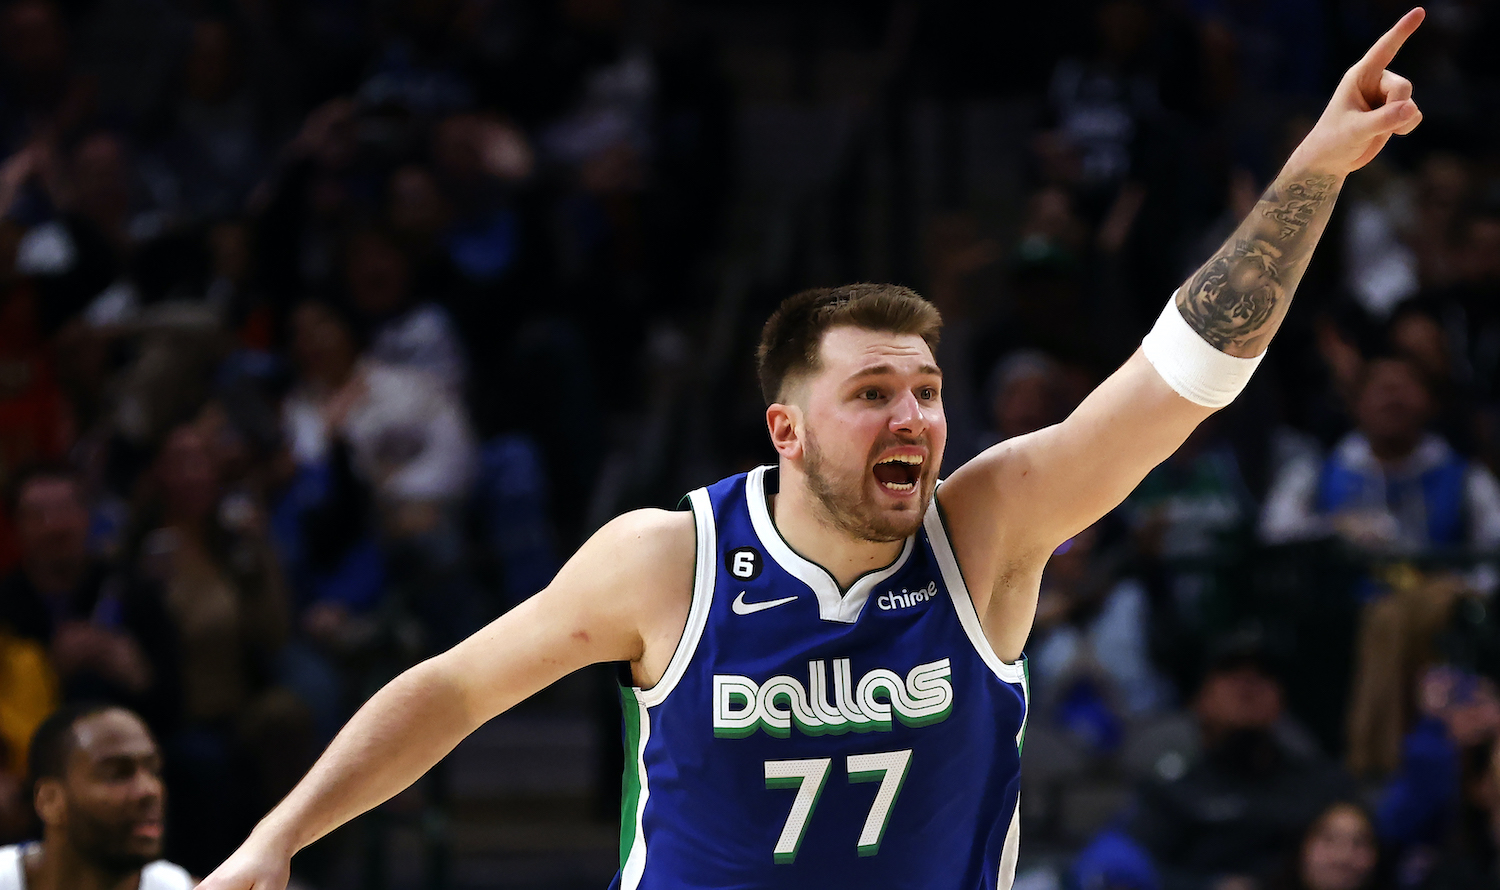 DALLAS, TX - JANUARY 30: Luka Doncic #77 of the Dallas Mavericks reacts after scoring a basket against the Detroit Pistons in the second half at American Airlines Center on January 30, 2023 in Dallas, Texas. The Mavericks won 111-105. NOTE TO USER: User expressly acknowledges and agrees that, by downloading and or using this photograph, User is consenting to the terms and conditions of the Getty Images License Agreement. (Photo by Ron Jenkins/Getty Images)